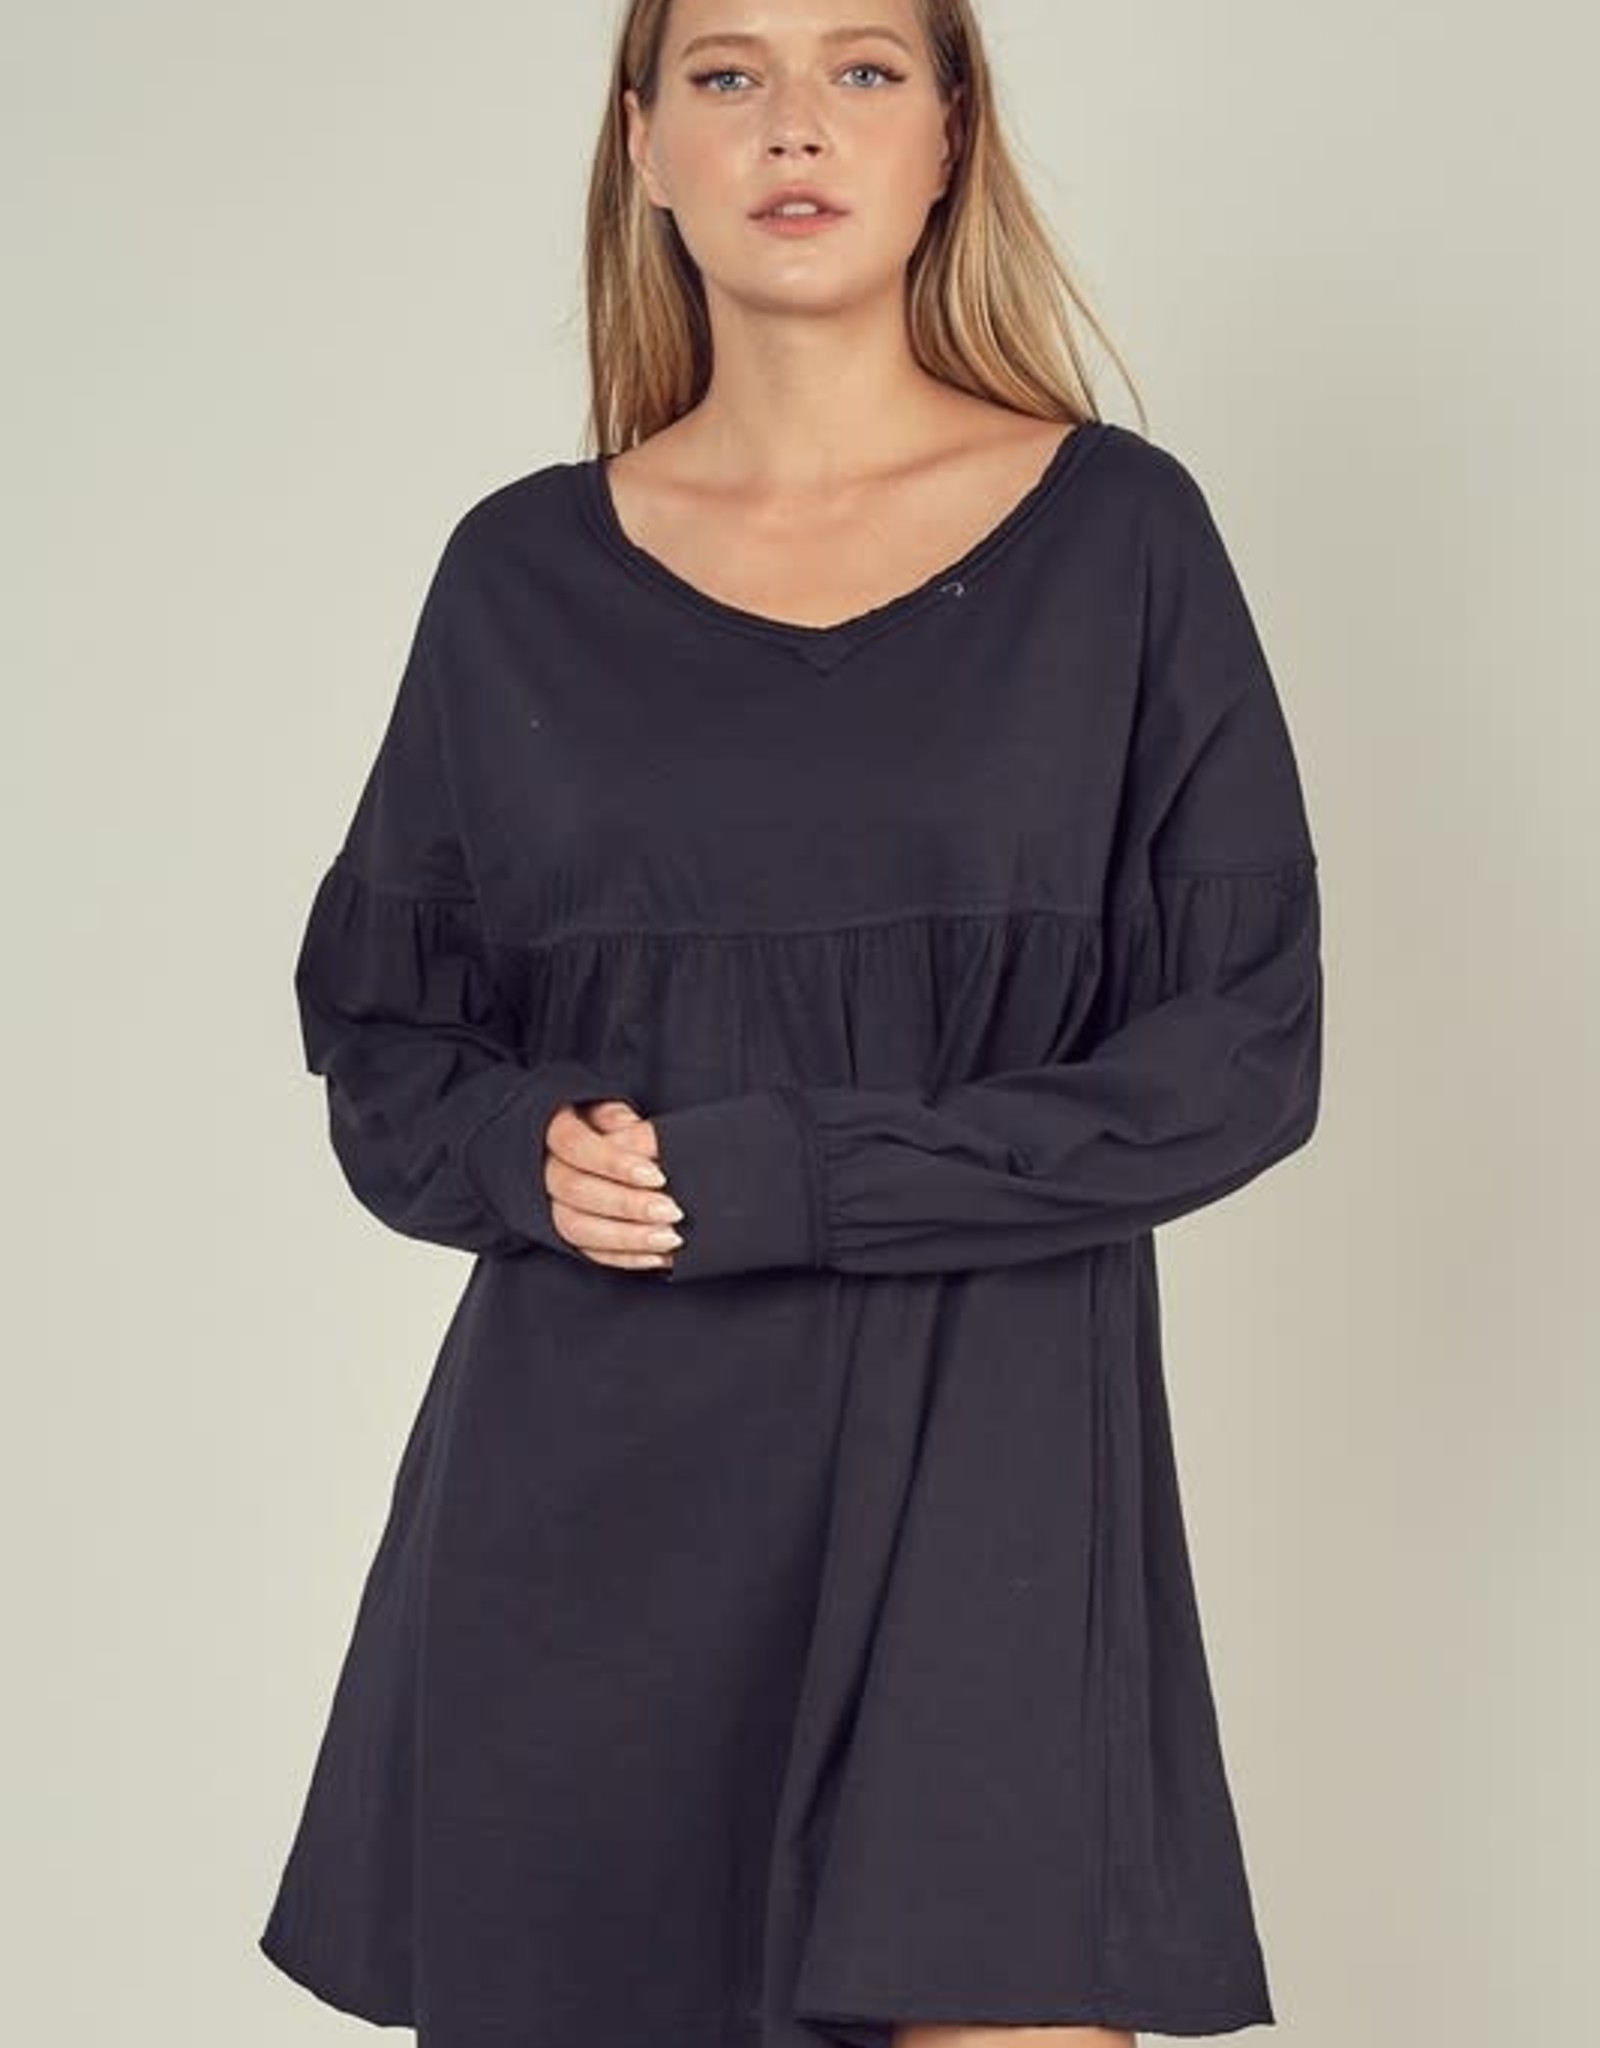 Easy Way Out Dress